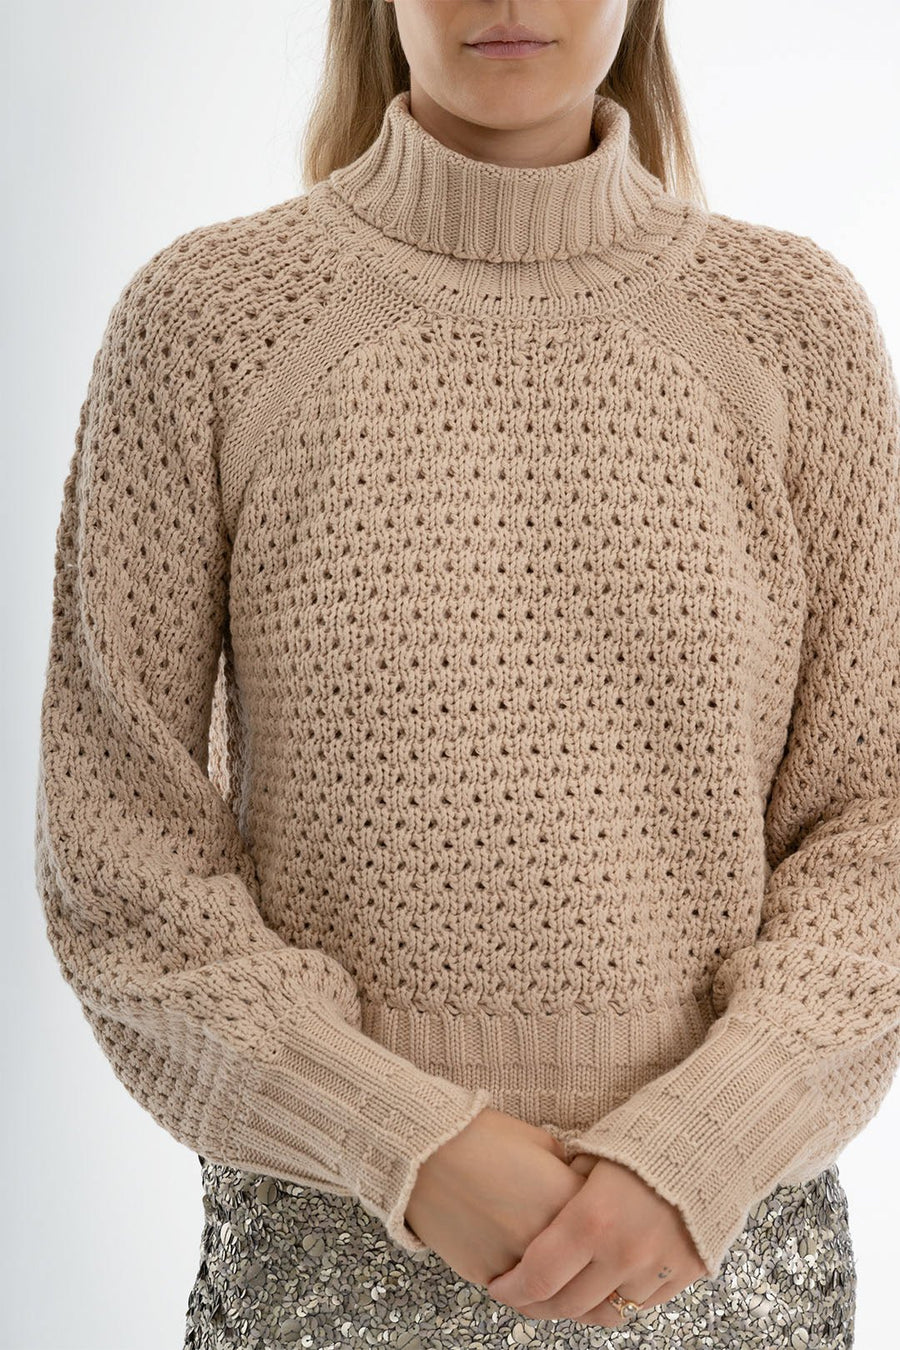 HONEYCOMB CROPPED TURTLENECK SWEATER, POWDER - Burning Torch Online Boutique